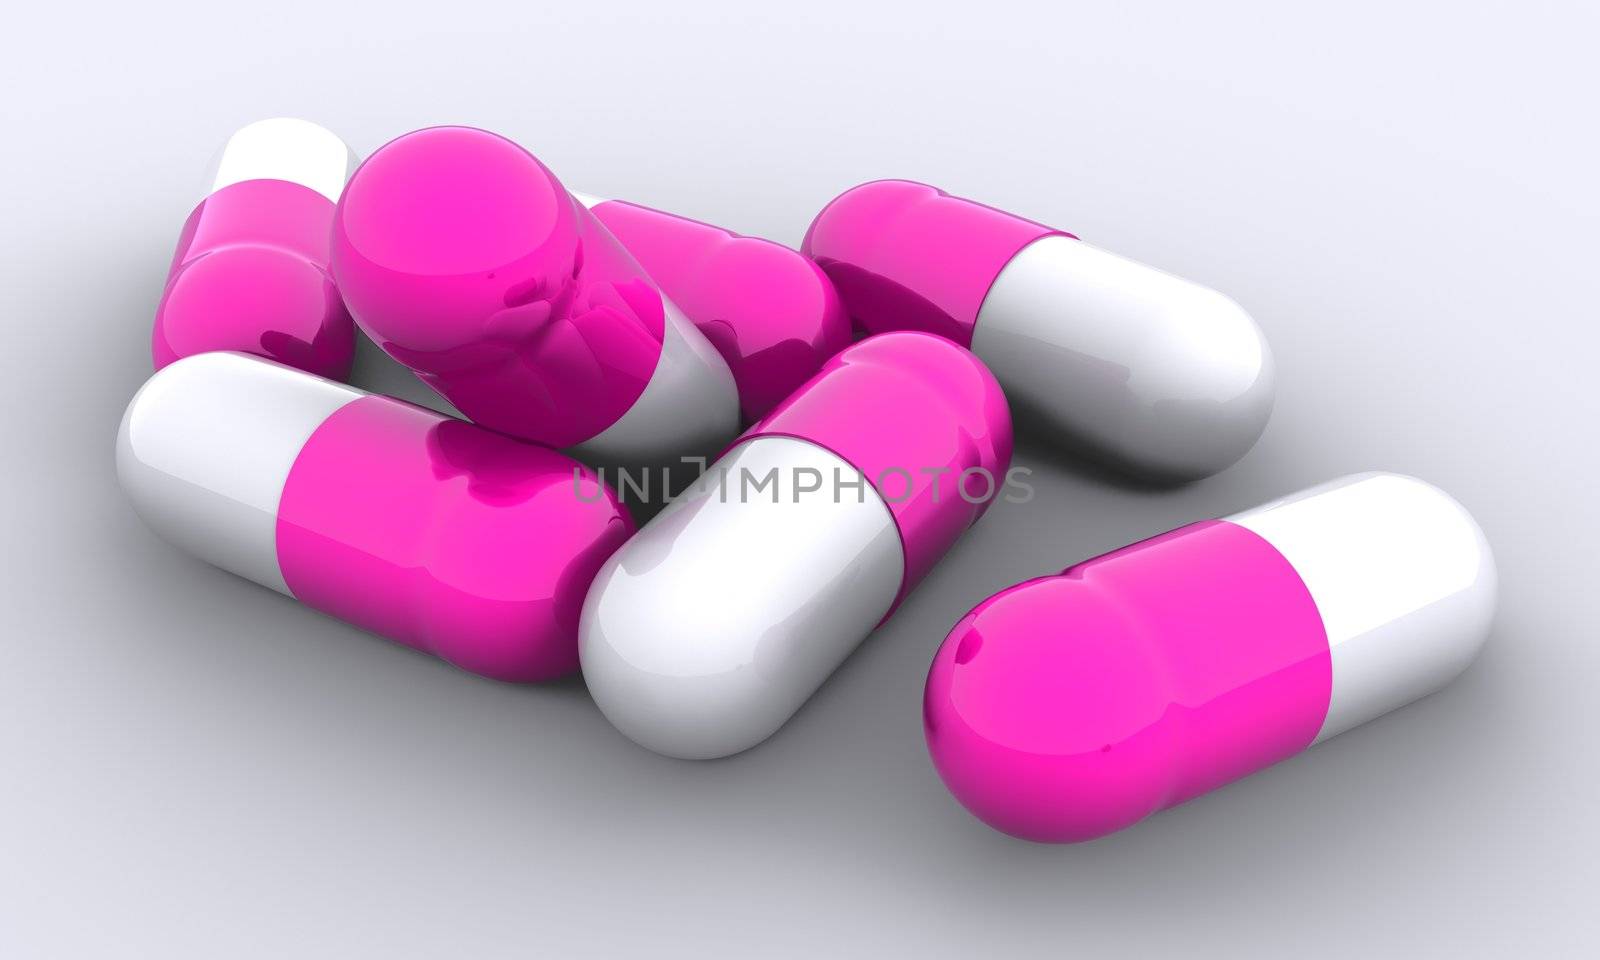 Concept of pink pills rendered on white background.